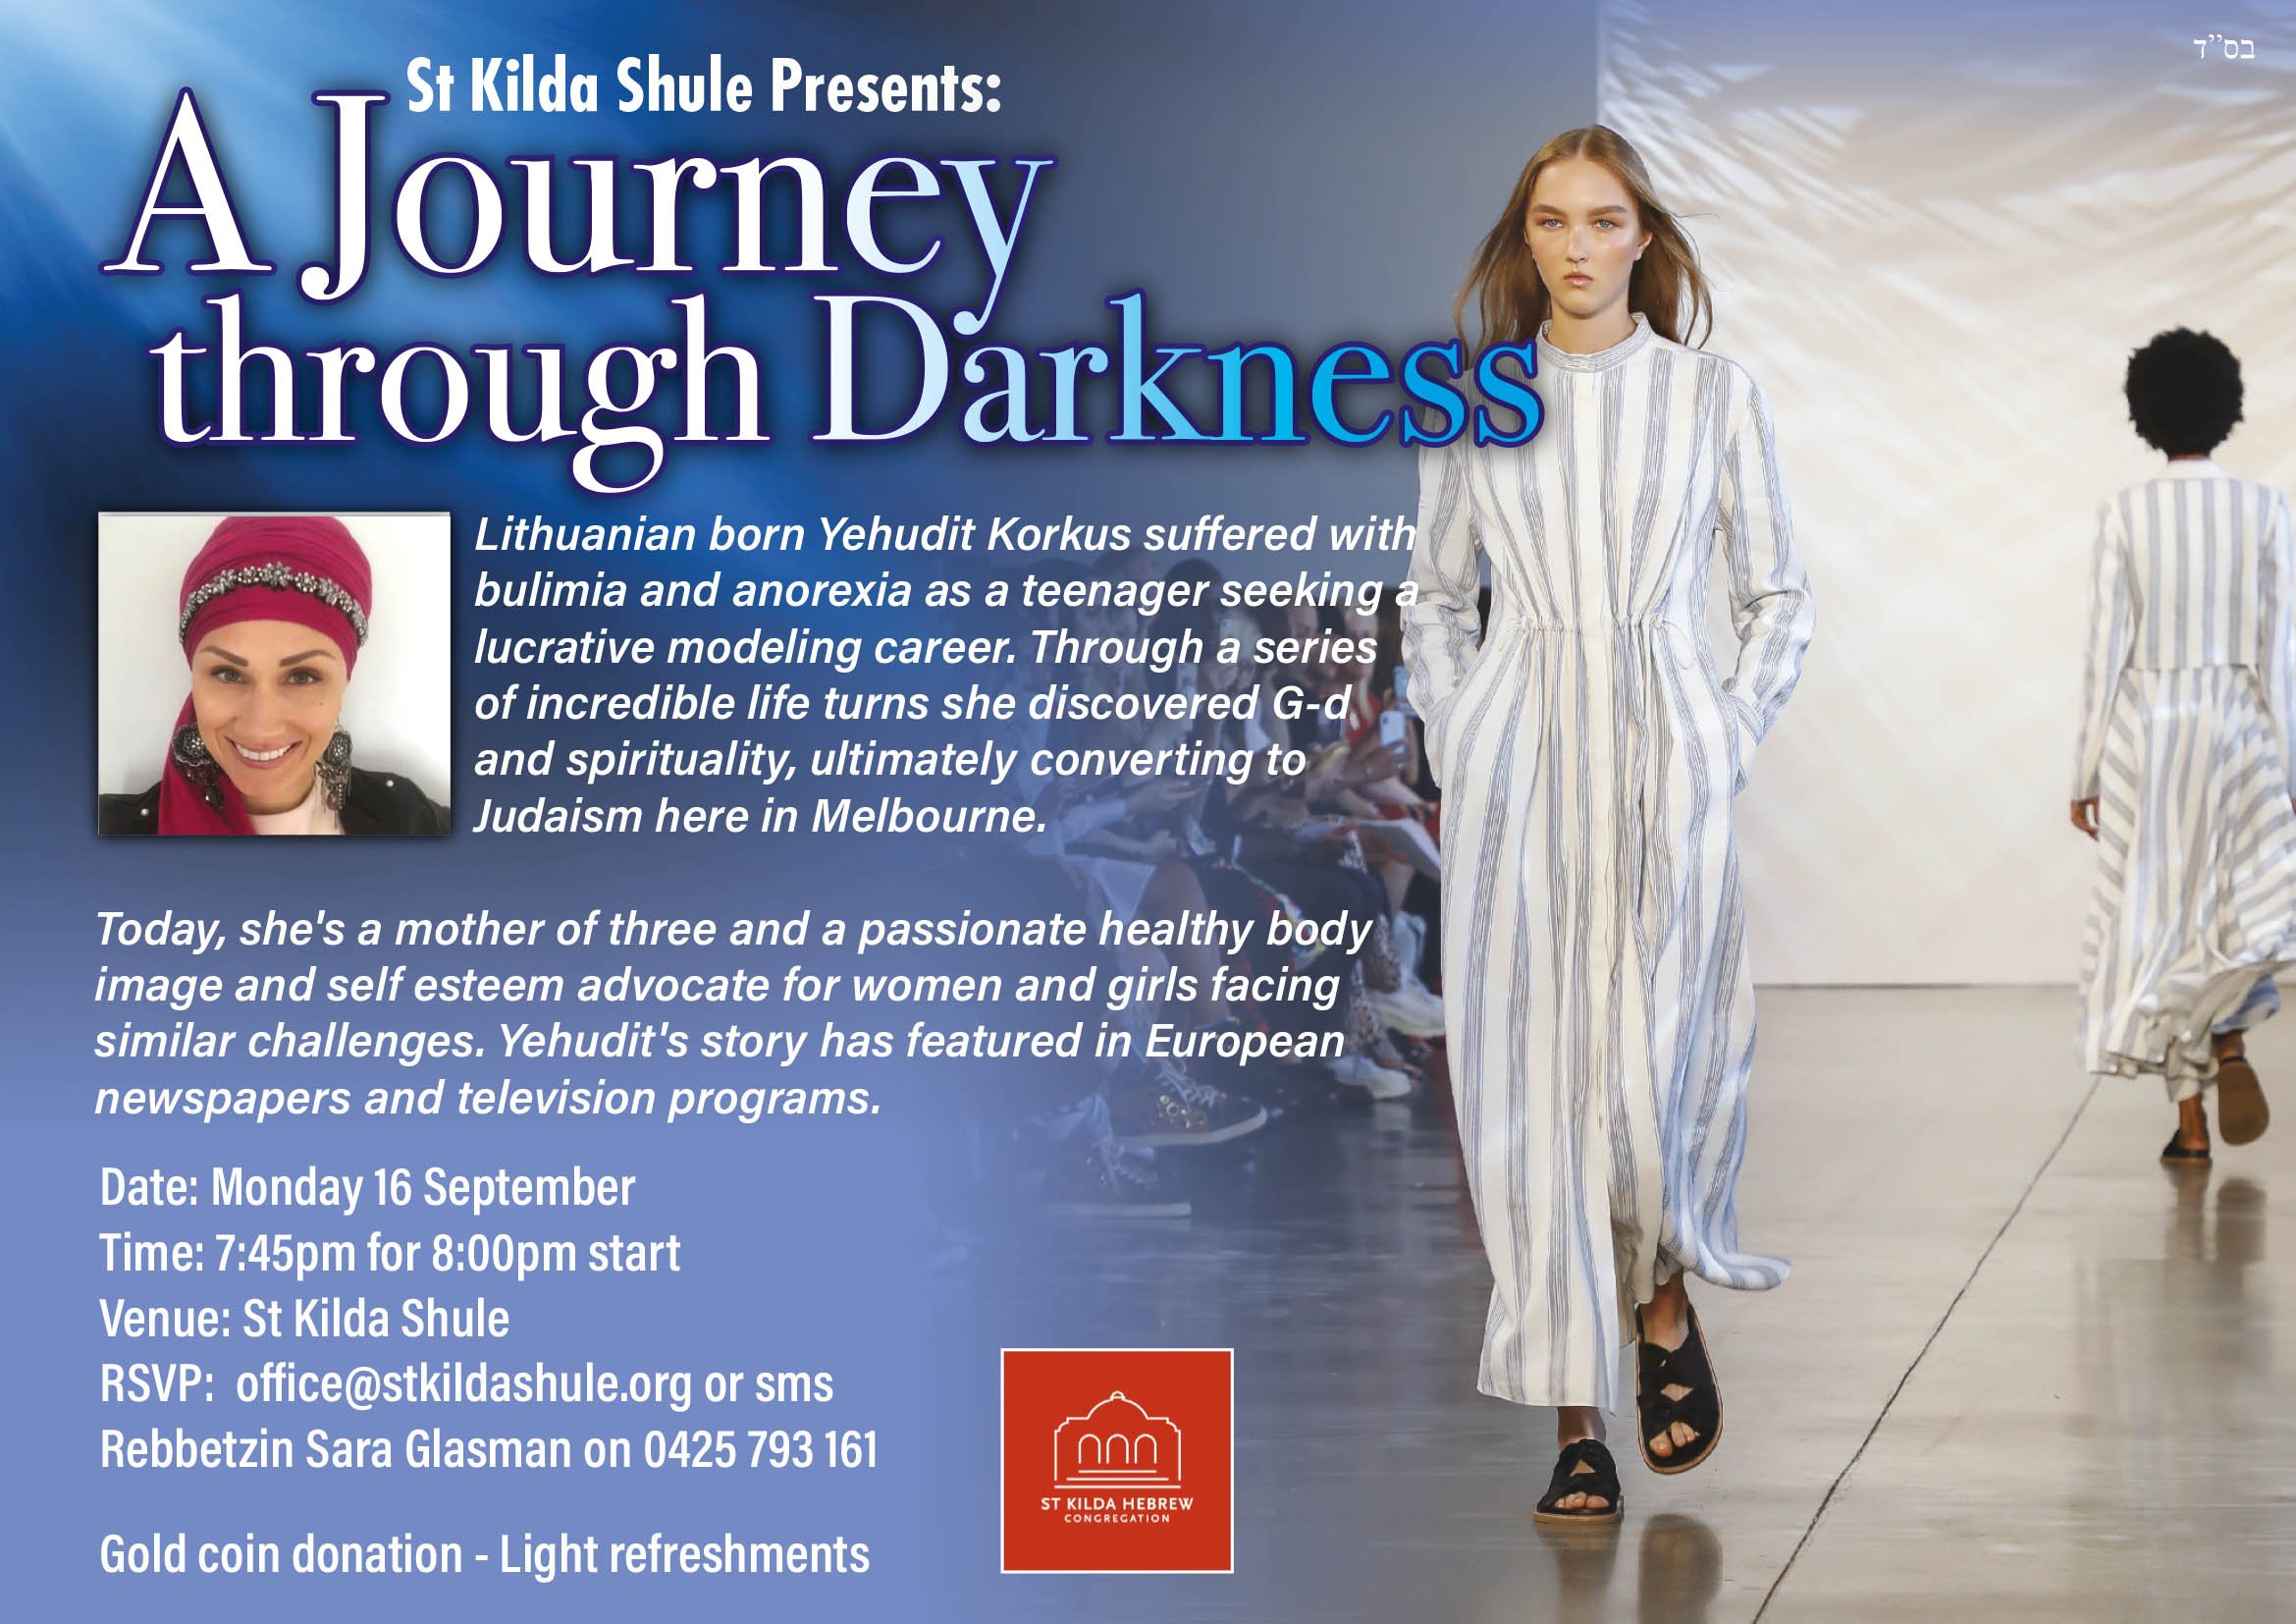 A journey through darkness - Events